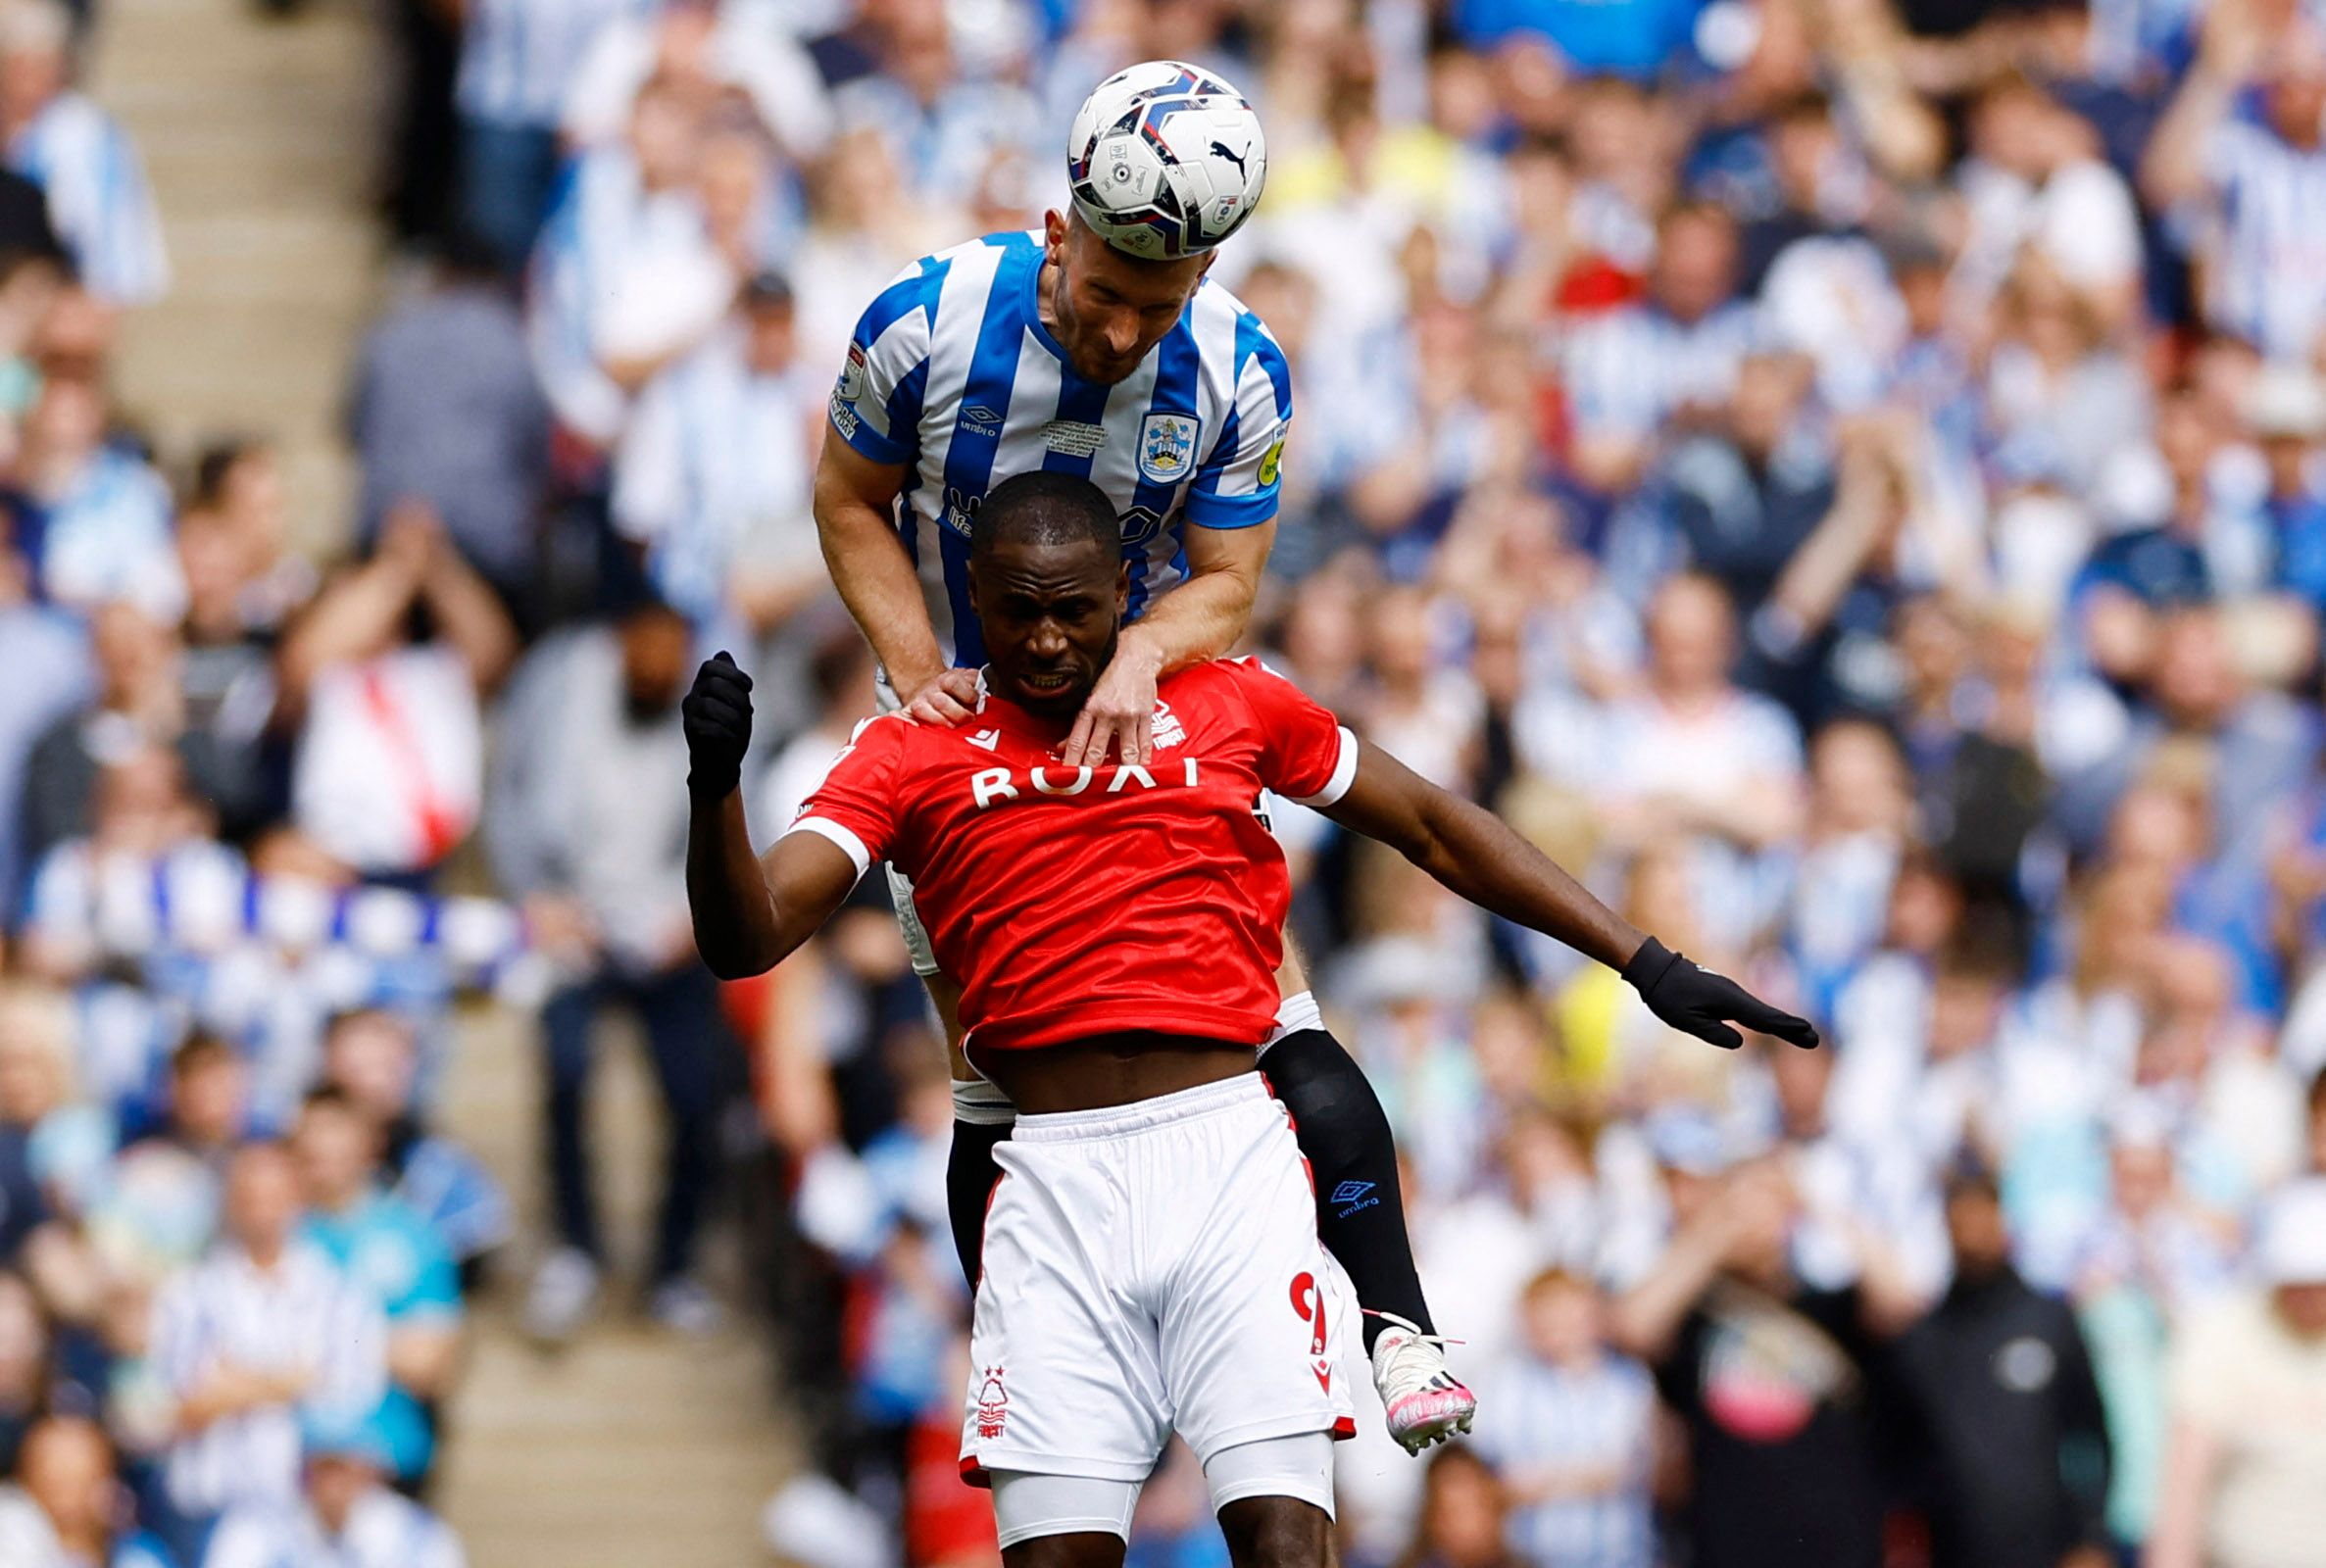 Soccer Football - Championship Play-Off Final - Huddersfield Town v Nottingham Forest - Wembley Stadium, London, Britain - May 29, 2022 Huddersfield Town's Tom Lees in action with Nottingham Forest's Keinan Davis Action Images via Reuters/Andrew Boyers